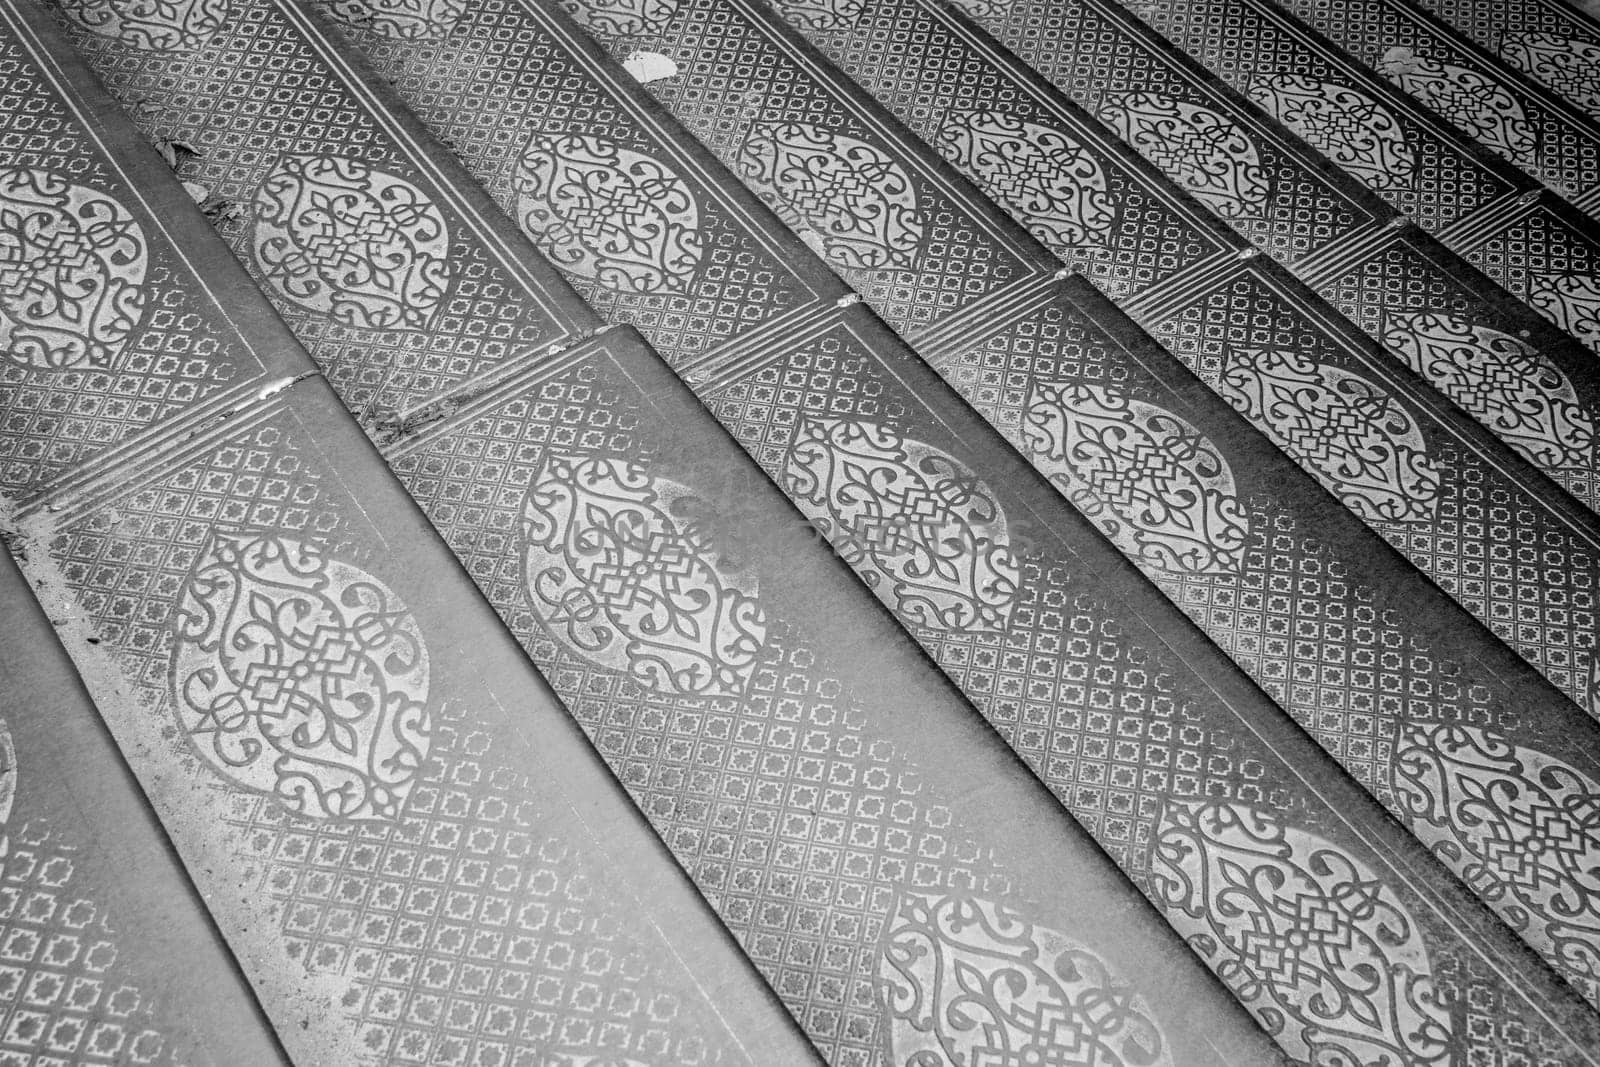 Ornate steel plate industrial staircase concept photo. Metal floor plate, steel staircase. District of European town. High quality picture for wallpaper. Suitable for background images and abstract illustrations.